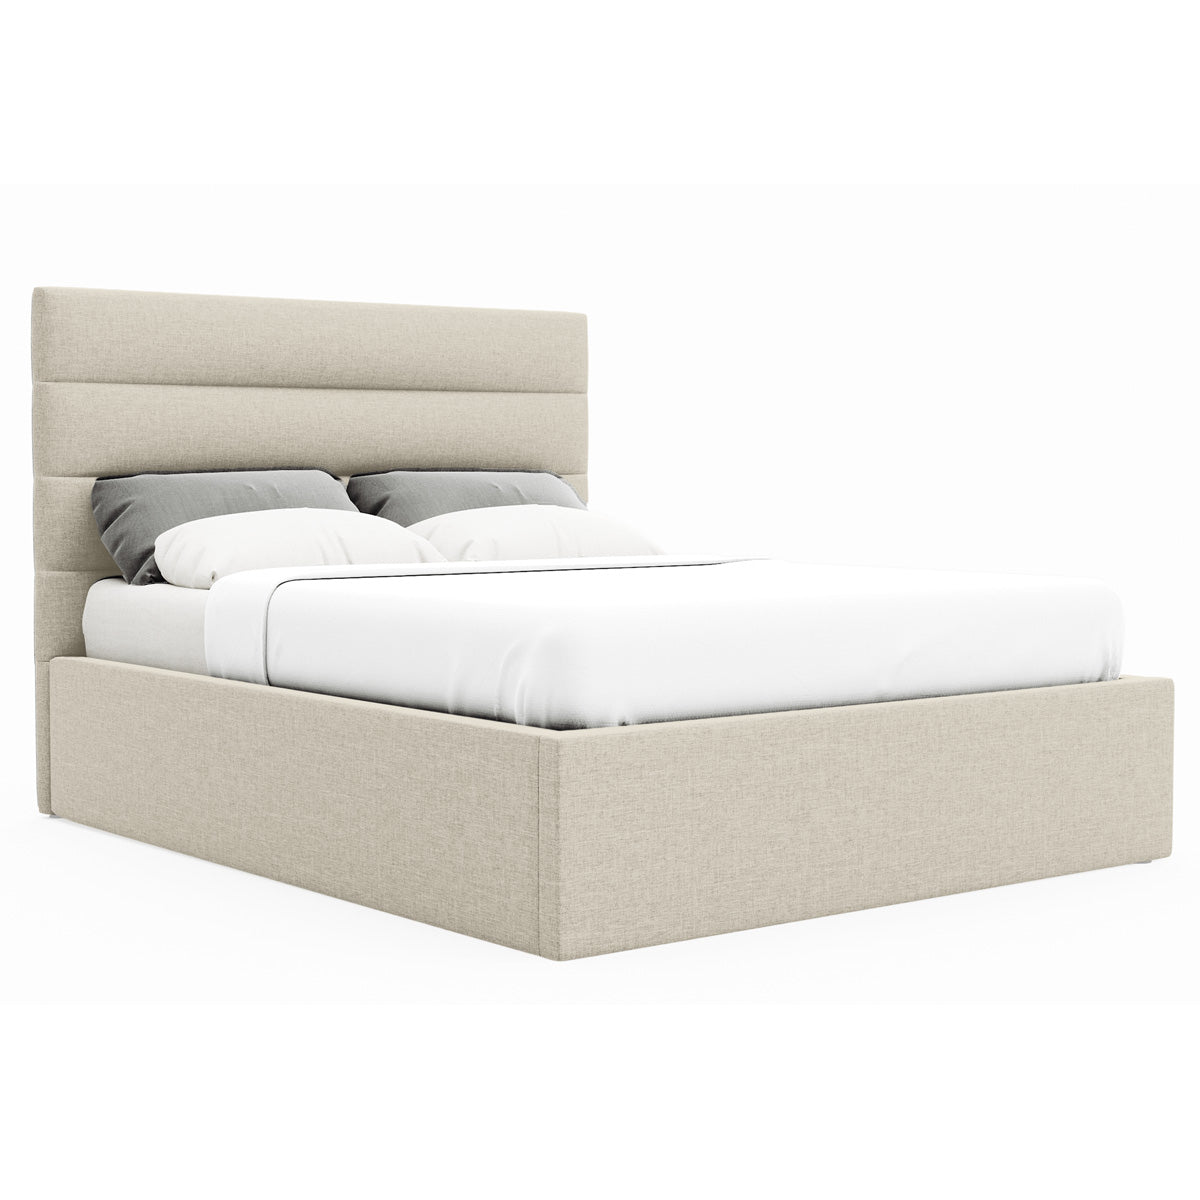 Benny Gas Lift Storage Bed Frame (Natural Beige Fabric)